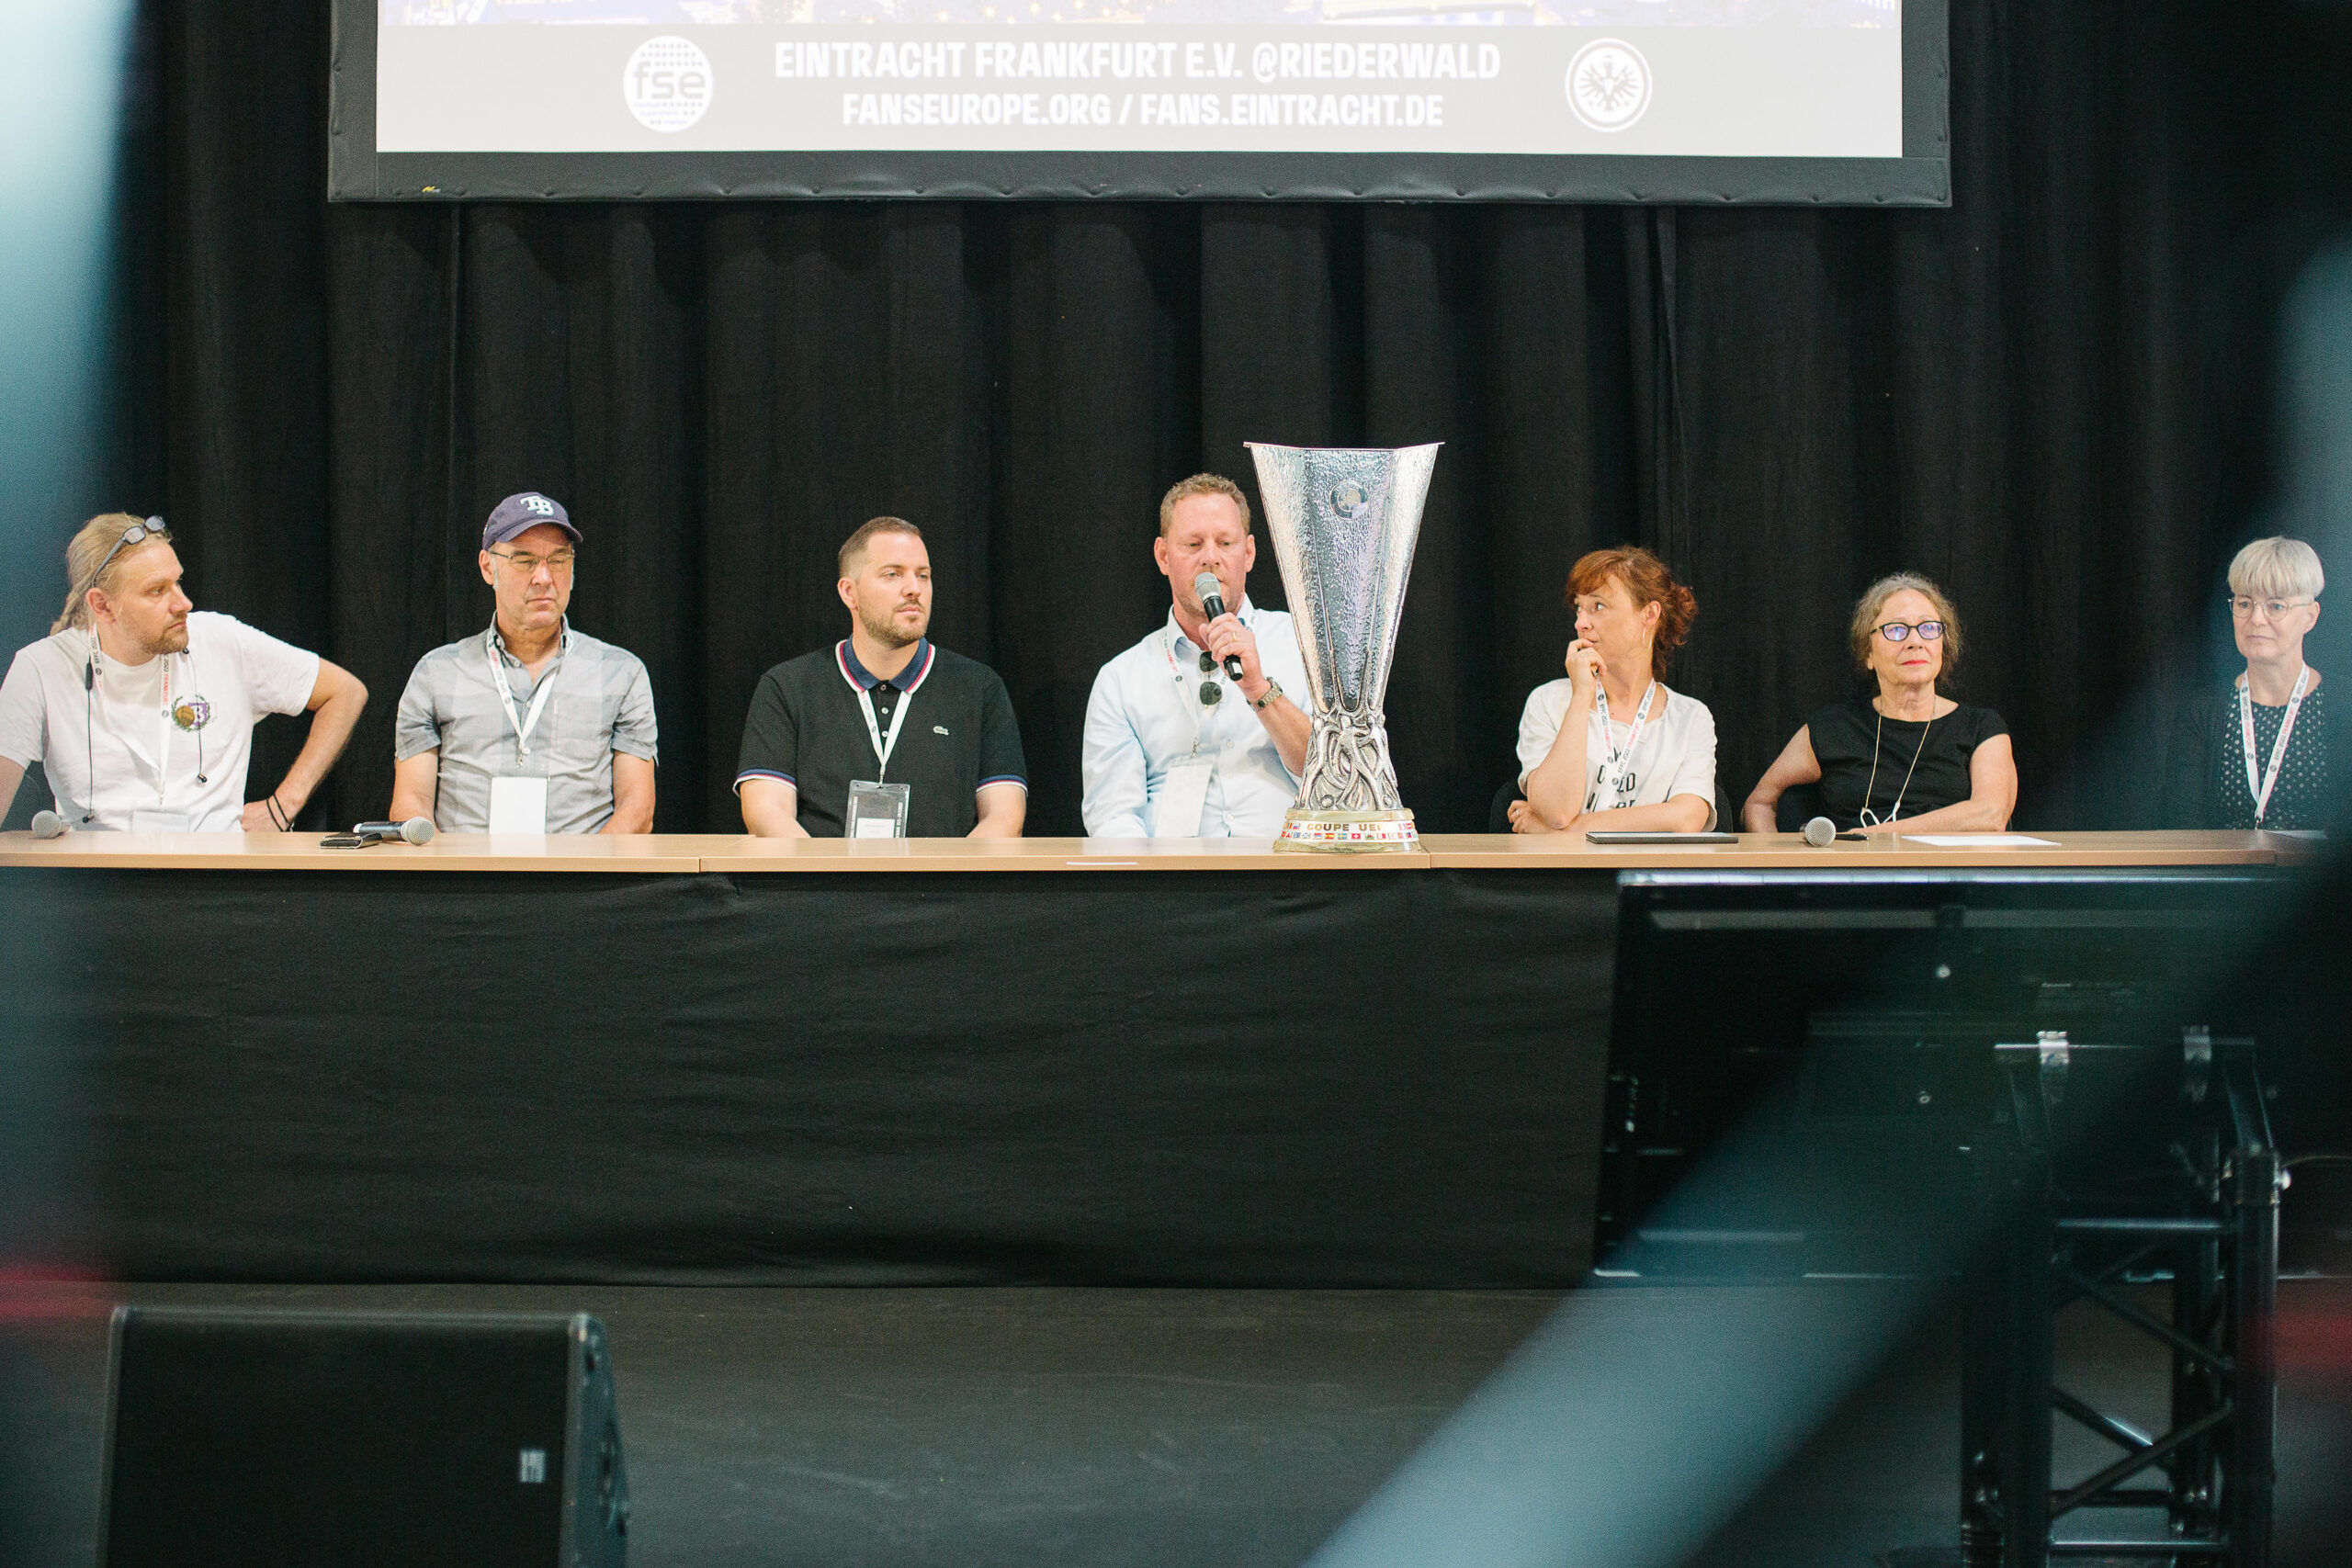 A panel of experts discuss German fandom at EFFC22. The Europa League trophy is on the table in front of them.